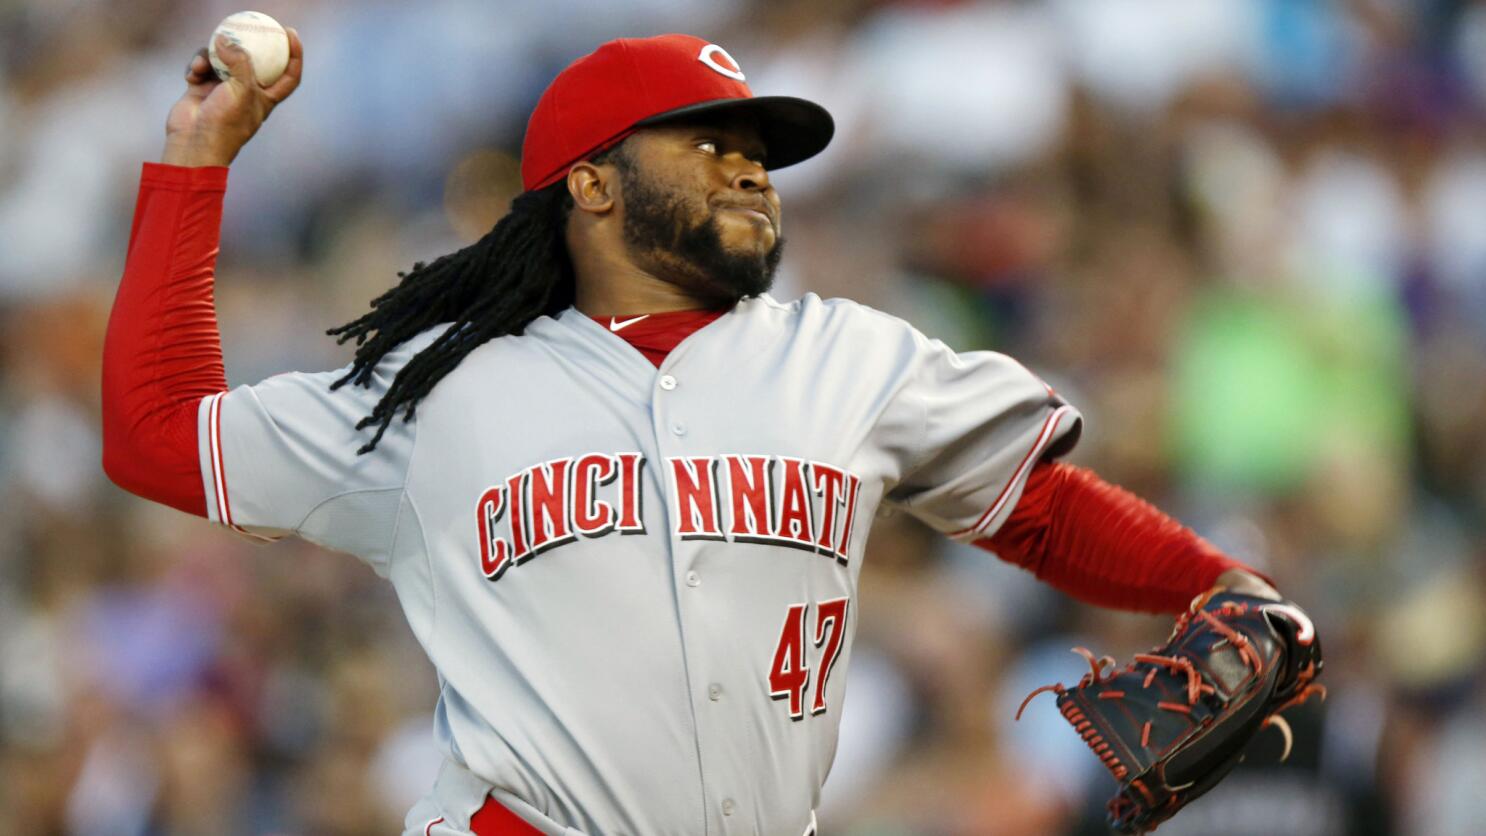 Royals acquire pitcher Johnny Cueto from Reds for three prospects